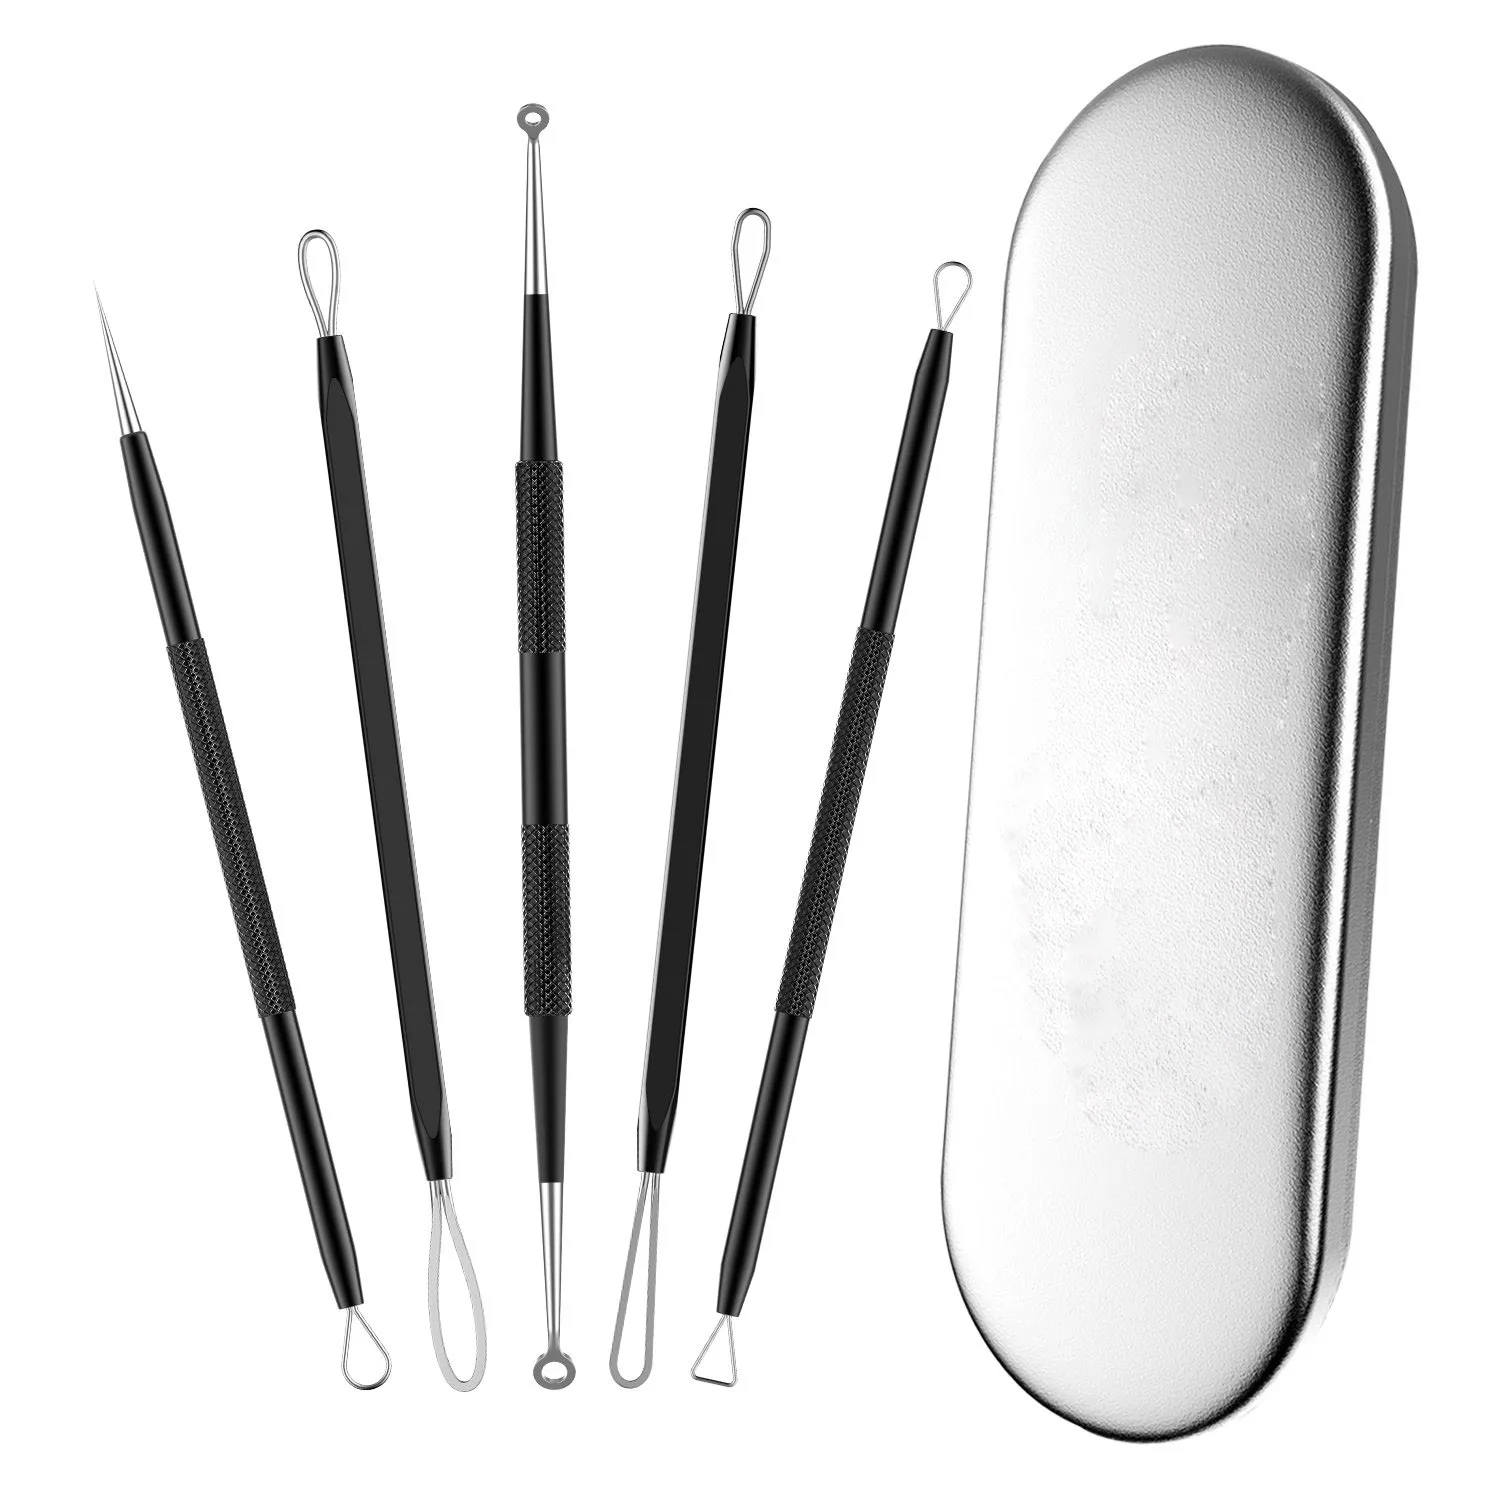 

Blackhead Remover Acne Comedone Zit Extractor Kit for Nose Facial Pore, Blemish Whitehead Extraction Pimple Popper Needle Tool